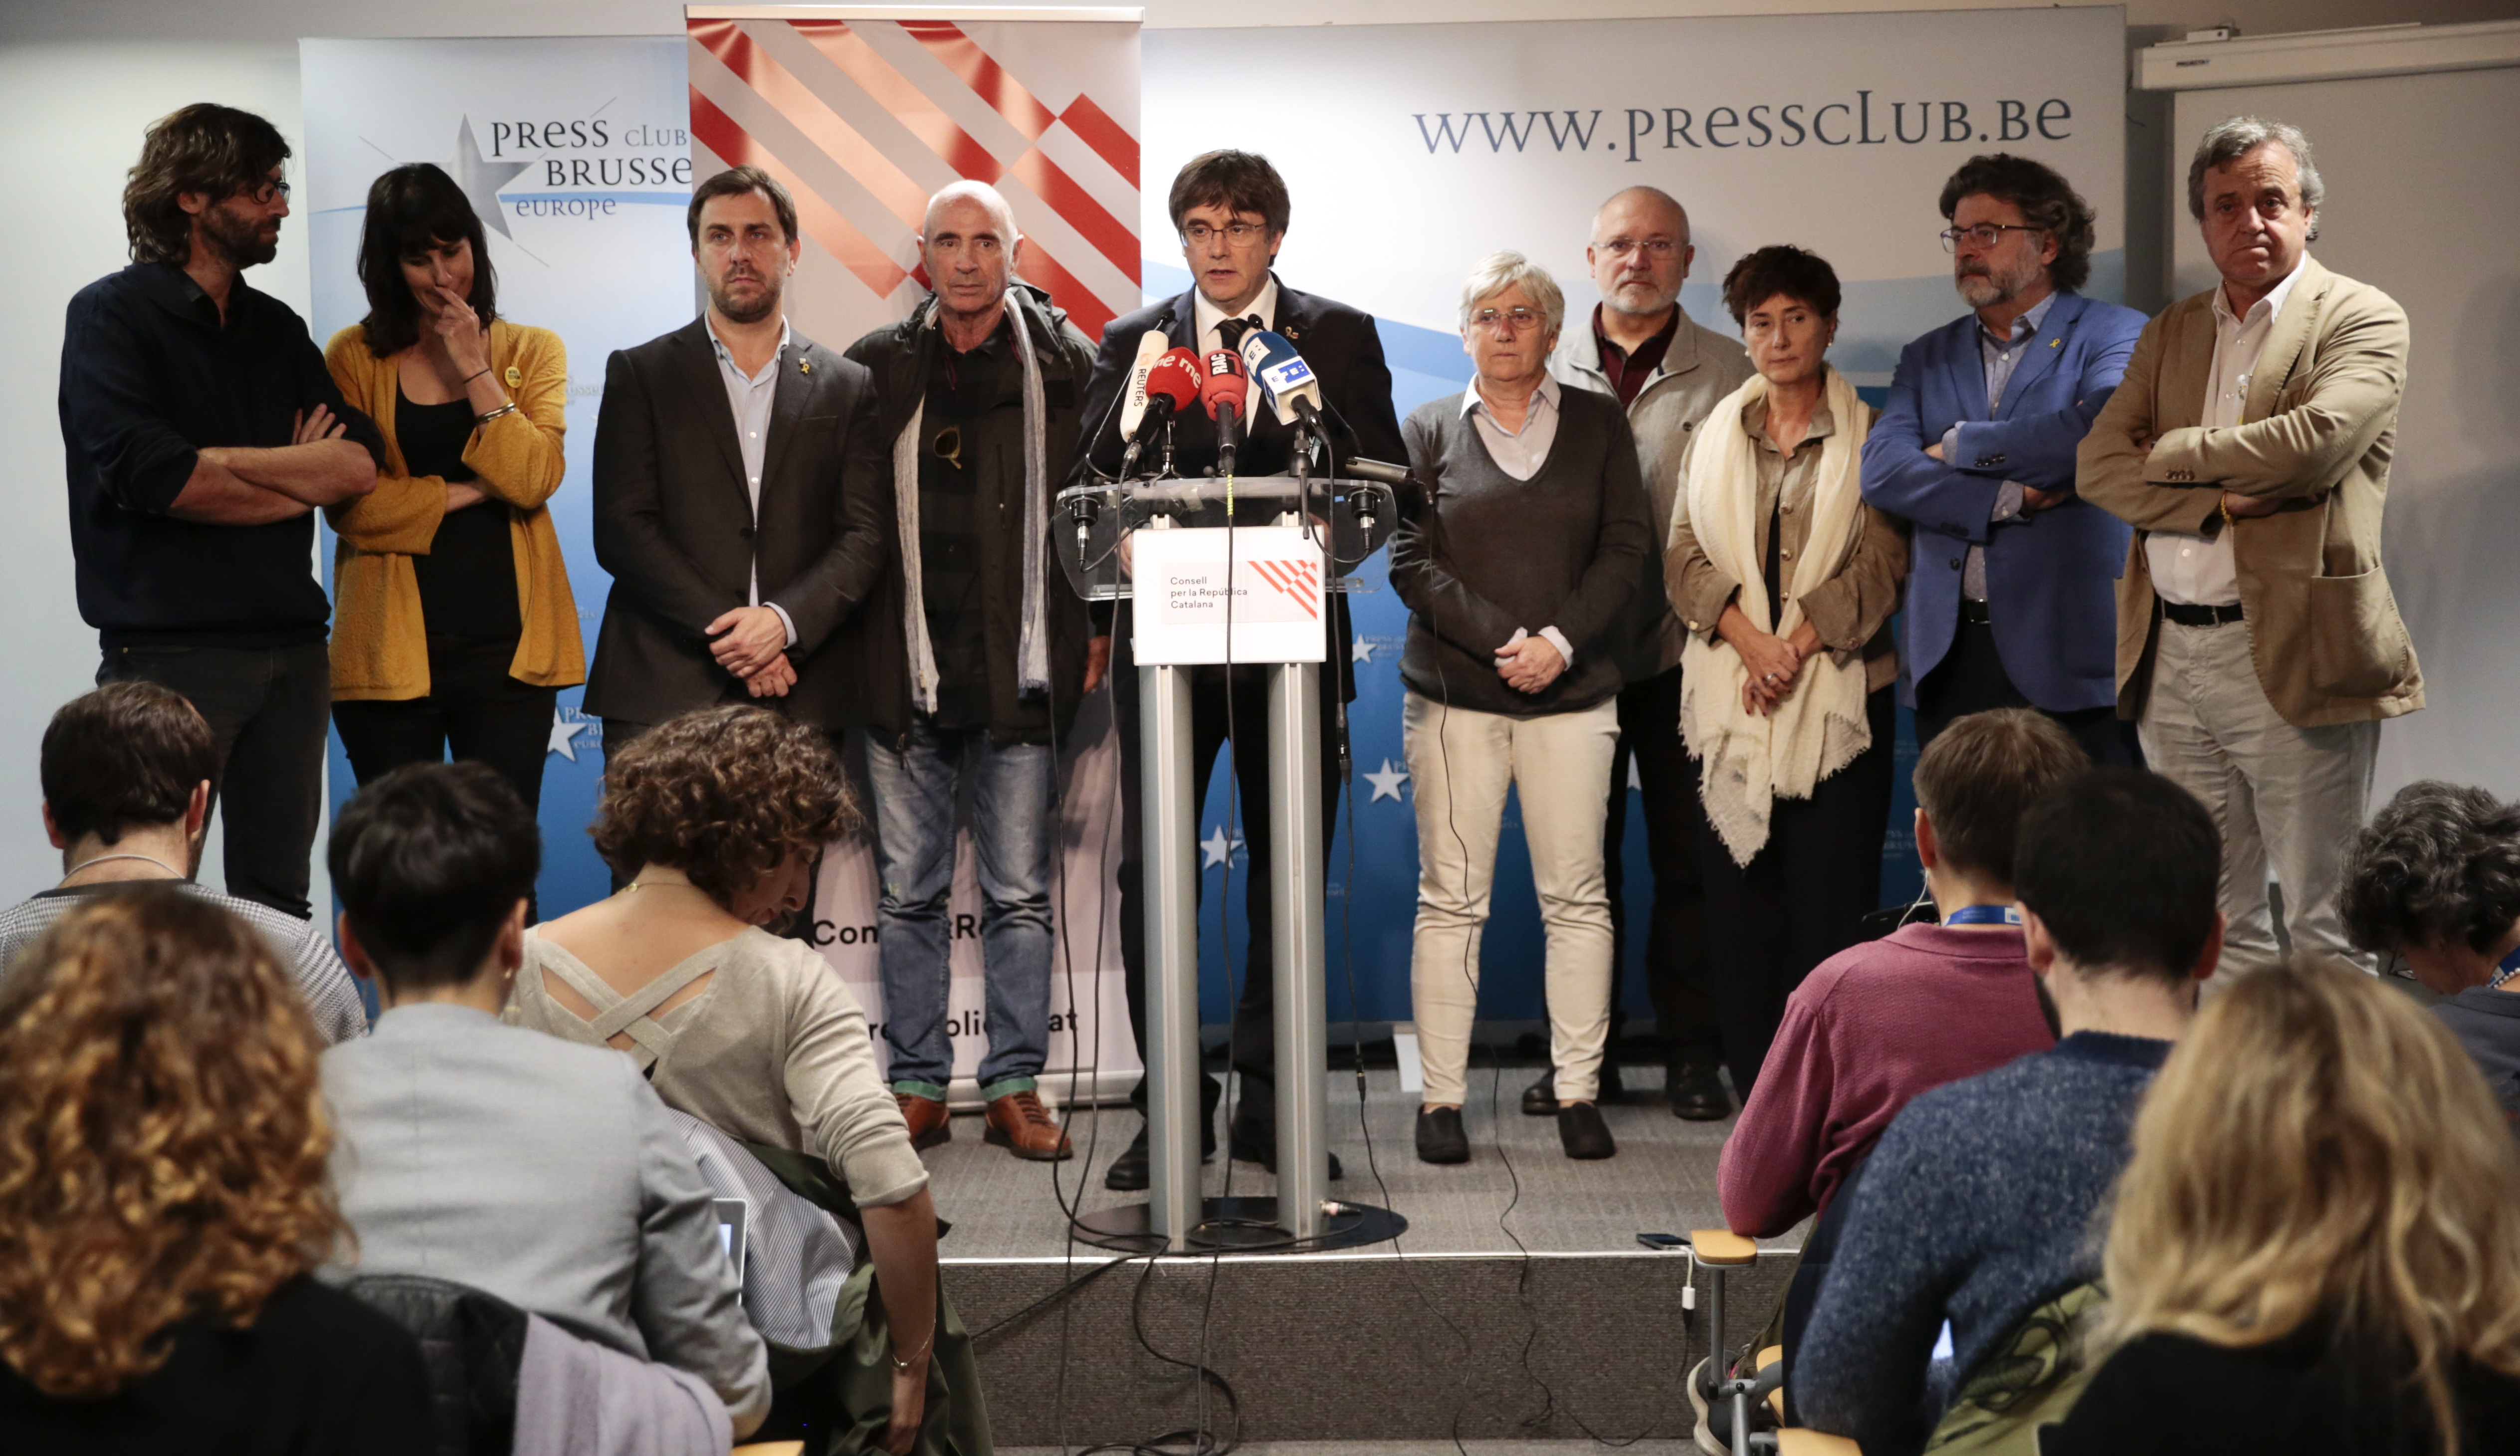 epa07886333 Ousted Catalan leader, Carles Puigdemont and members of Consell per la Republica Catalana give a press conference in Waterloo, Belgium, 01 October 2019. In Spain, several organizations called protests to mark the second anniversary of the unlawful 1 October (1-O) independence referendum held in Catalonia in 2017.  EPA/OLIVIER HOSLET